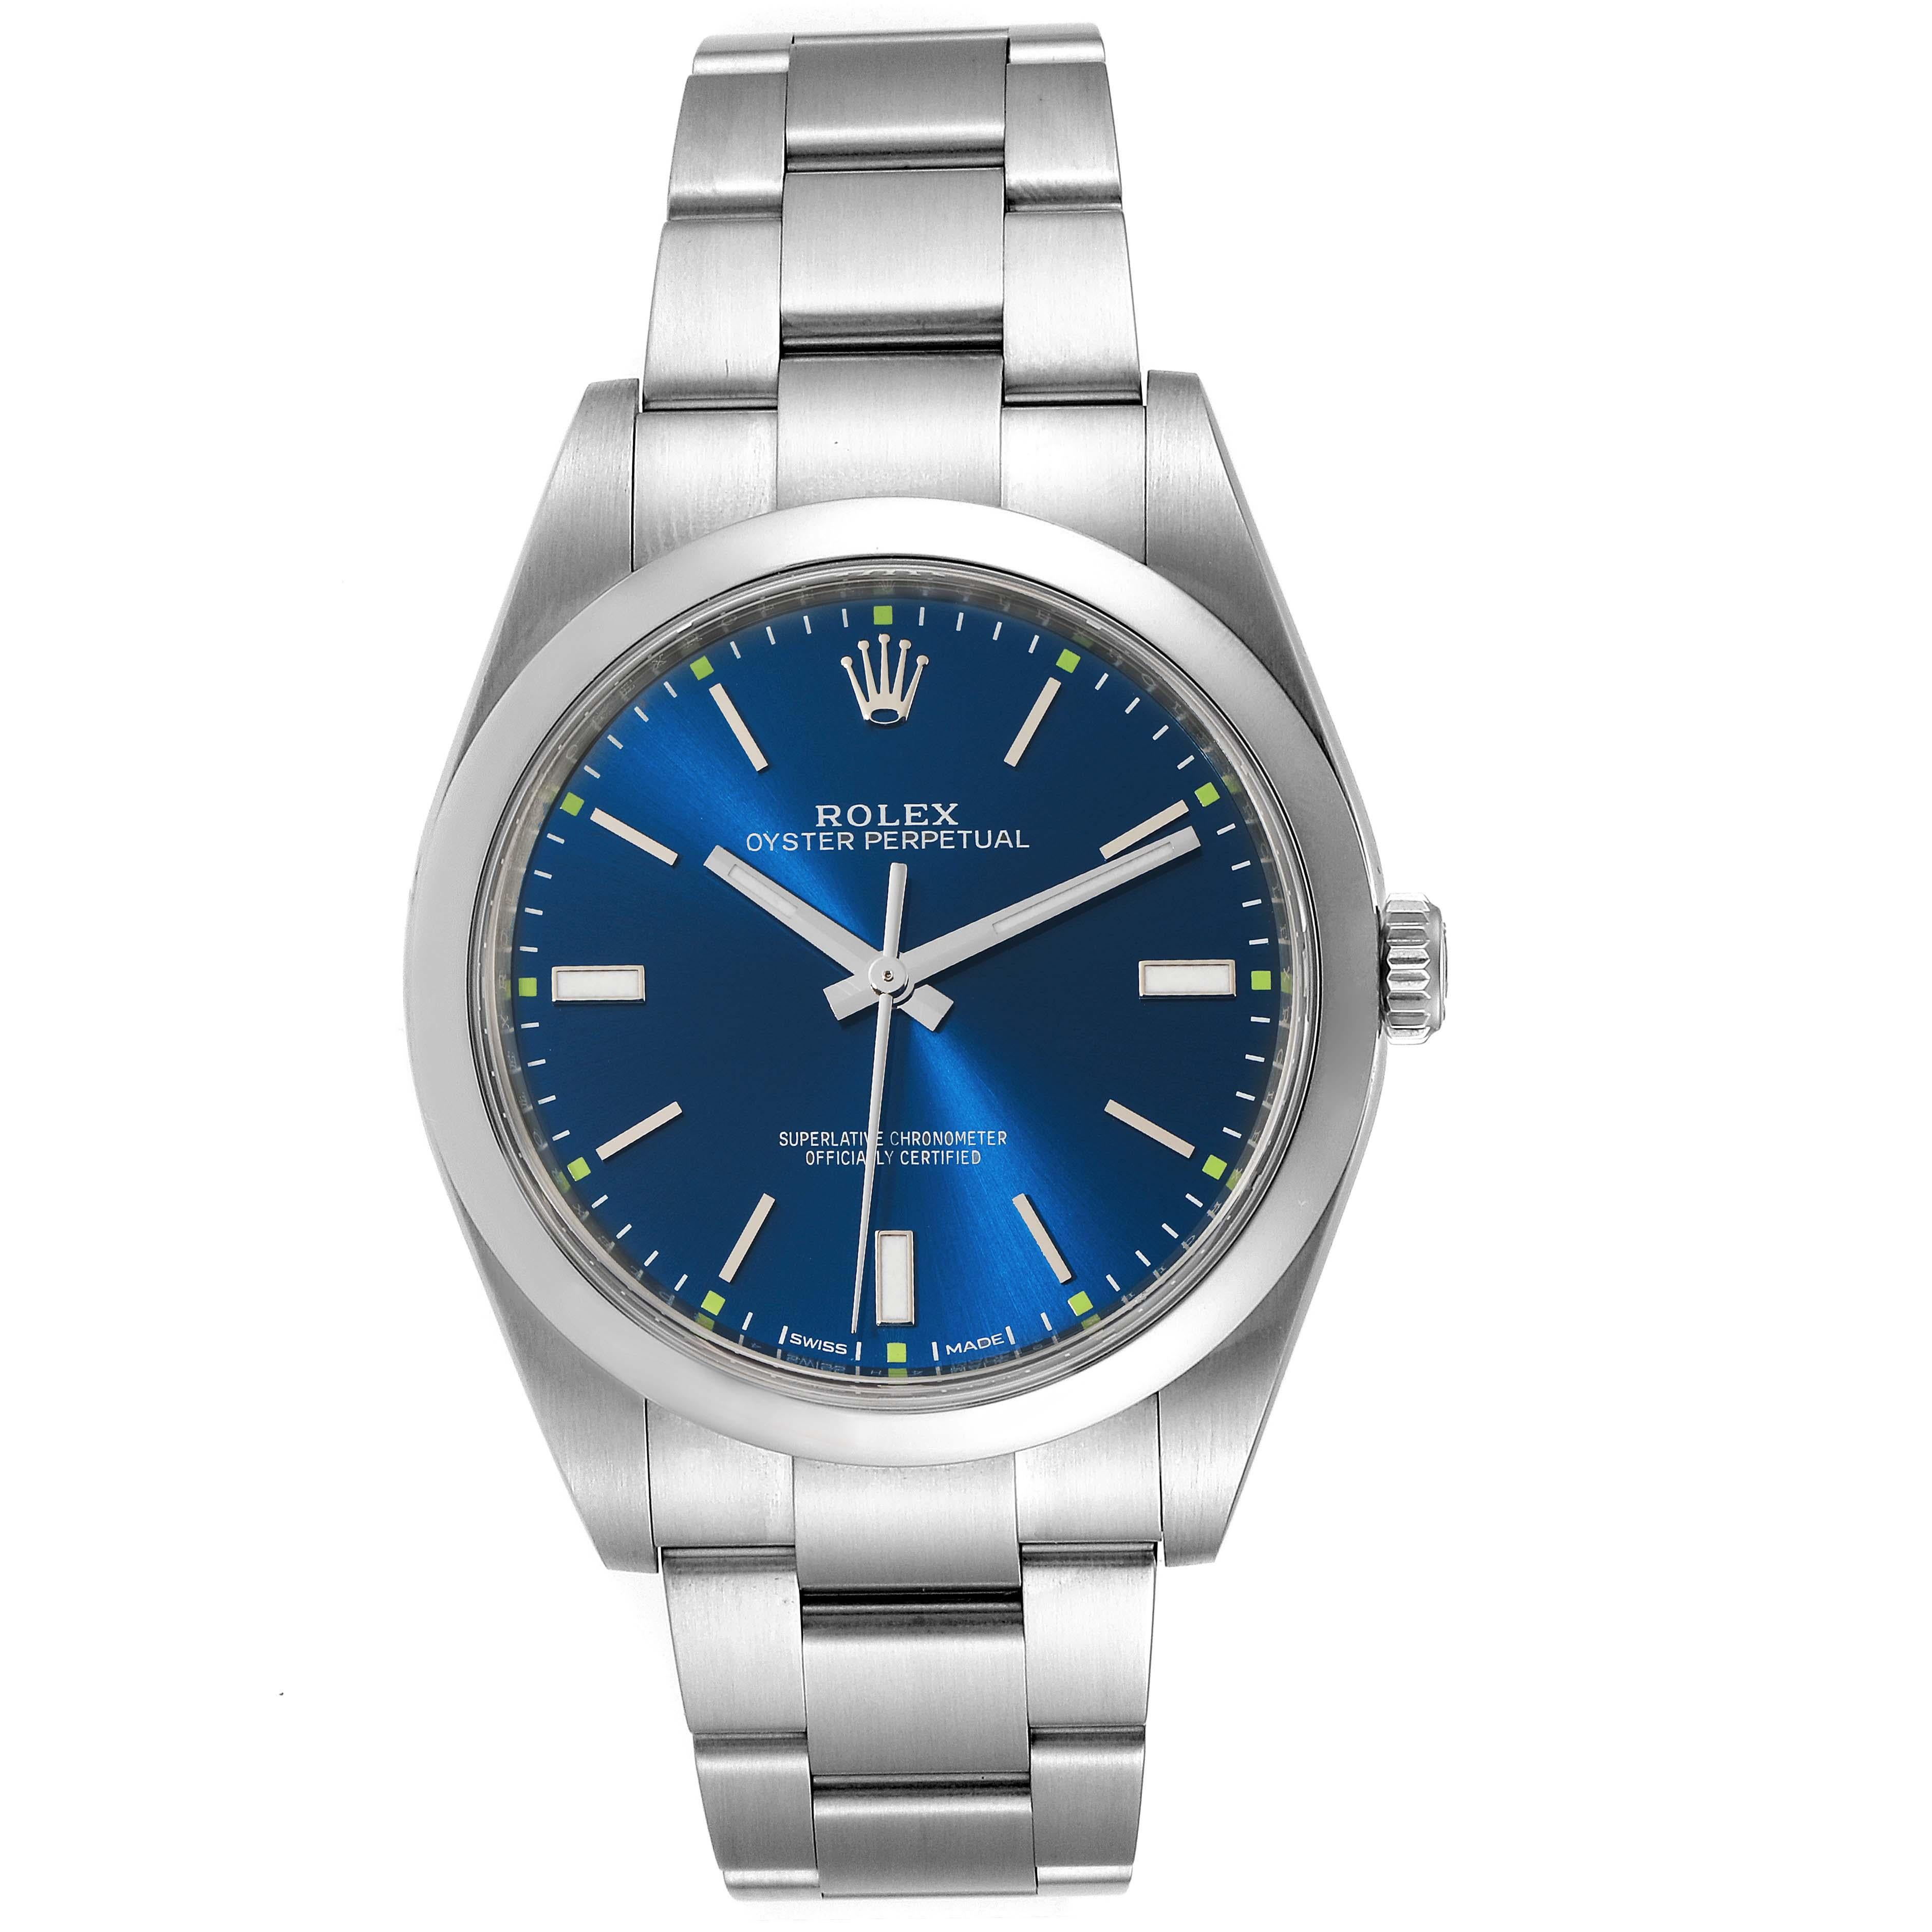 Rolex Oyster Perpetual 39 Blue Dial Steel Mens Watch 114300. Officially certified chronometer self-winding movement. Stainless steel case 39 mm in diameter. Rolex logo on a crown. Stainless steel smooth domed bezel. Scratch resistant sapphire